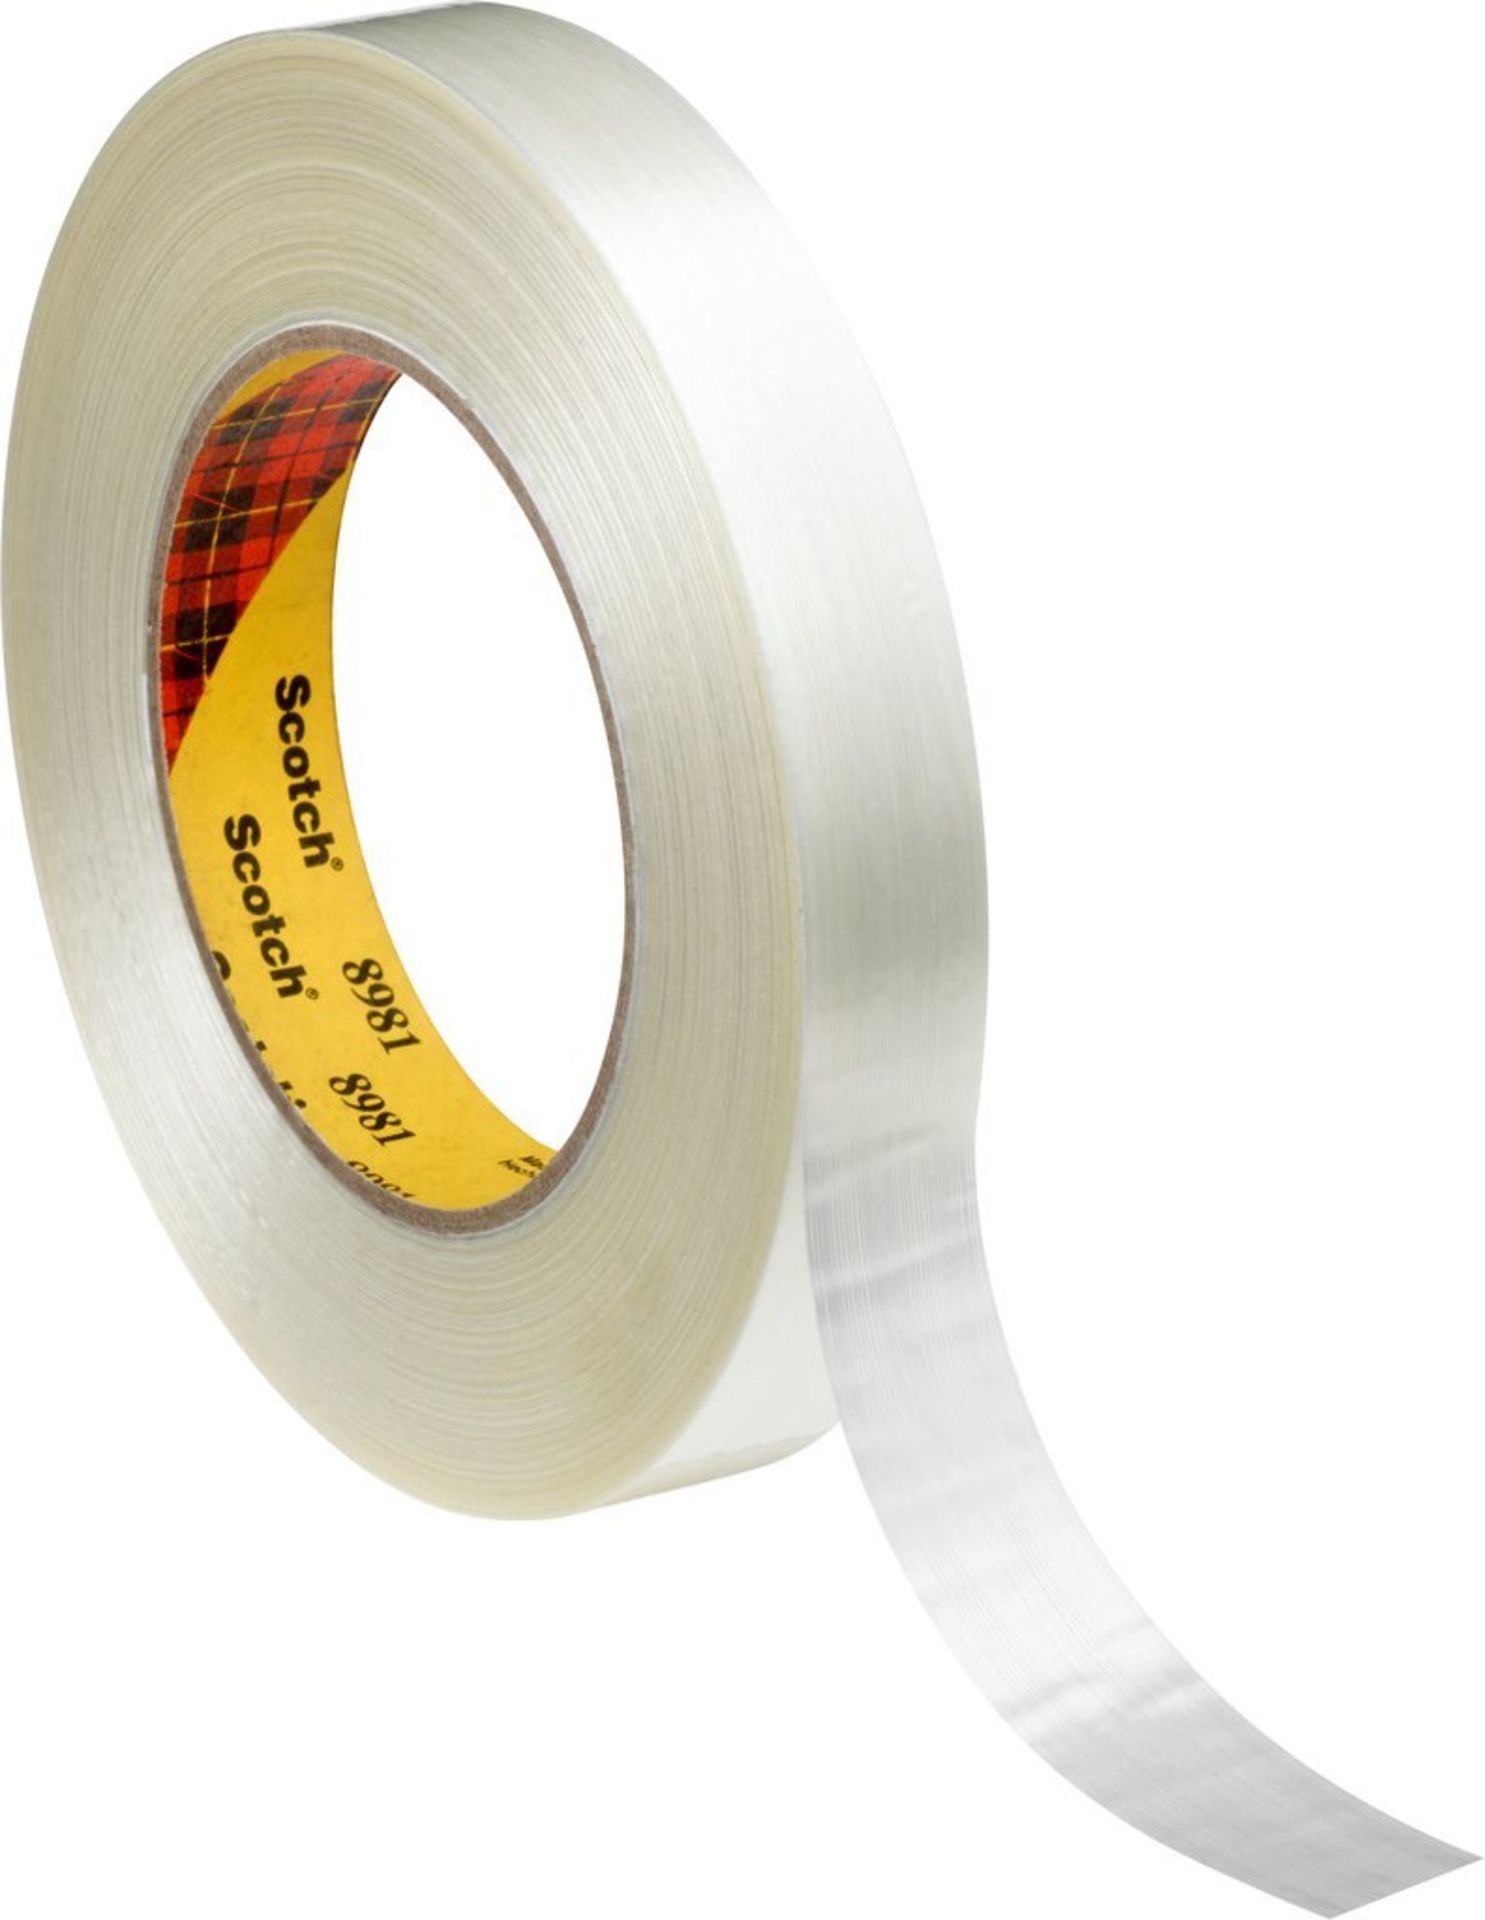 RRP - £51.44 3M 8981 Filament Tape, 25 mm x 50 m, Translucent, Pack of 36